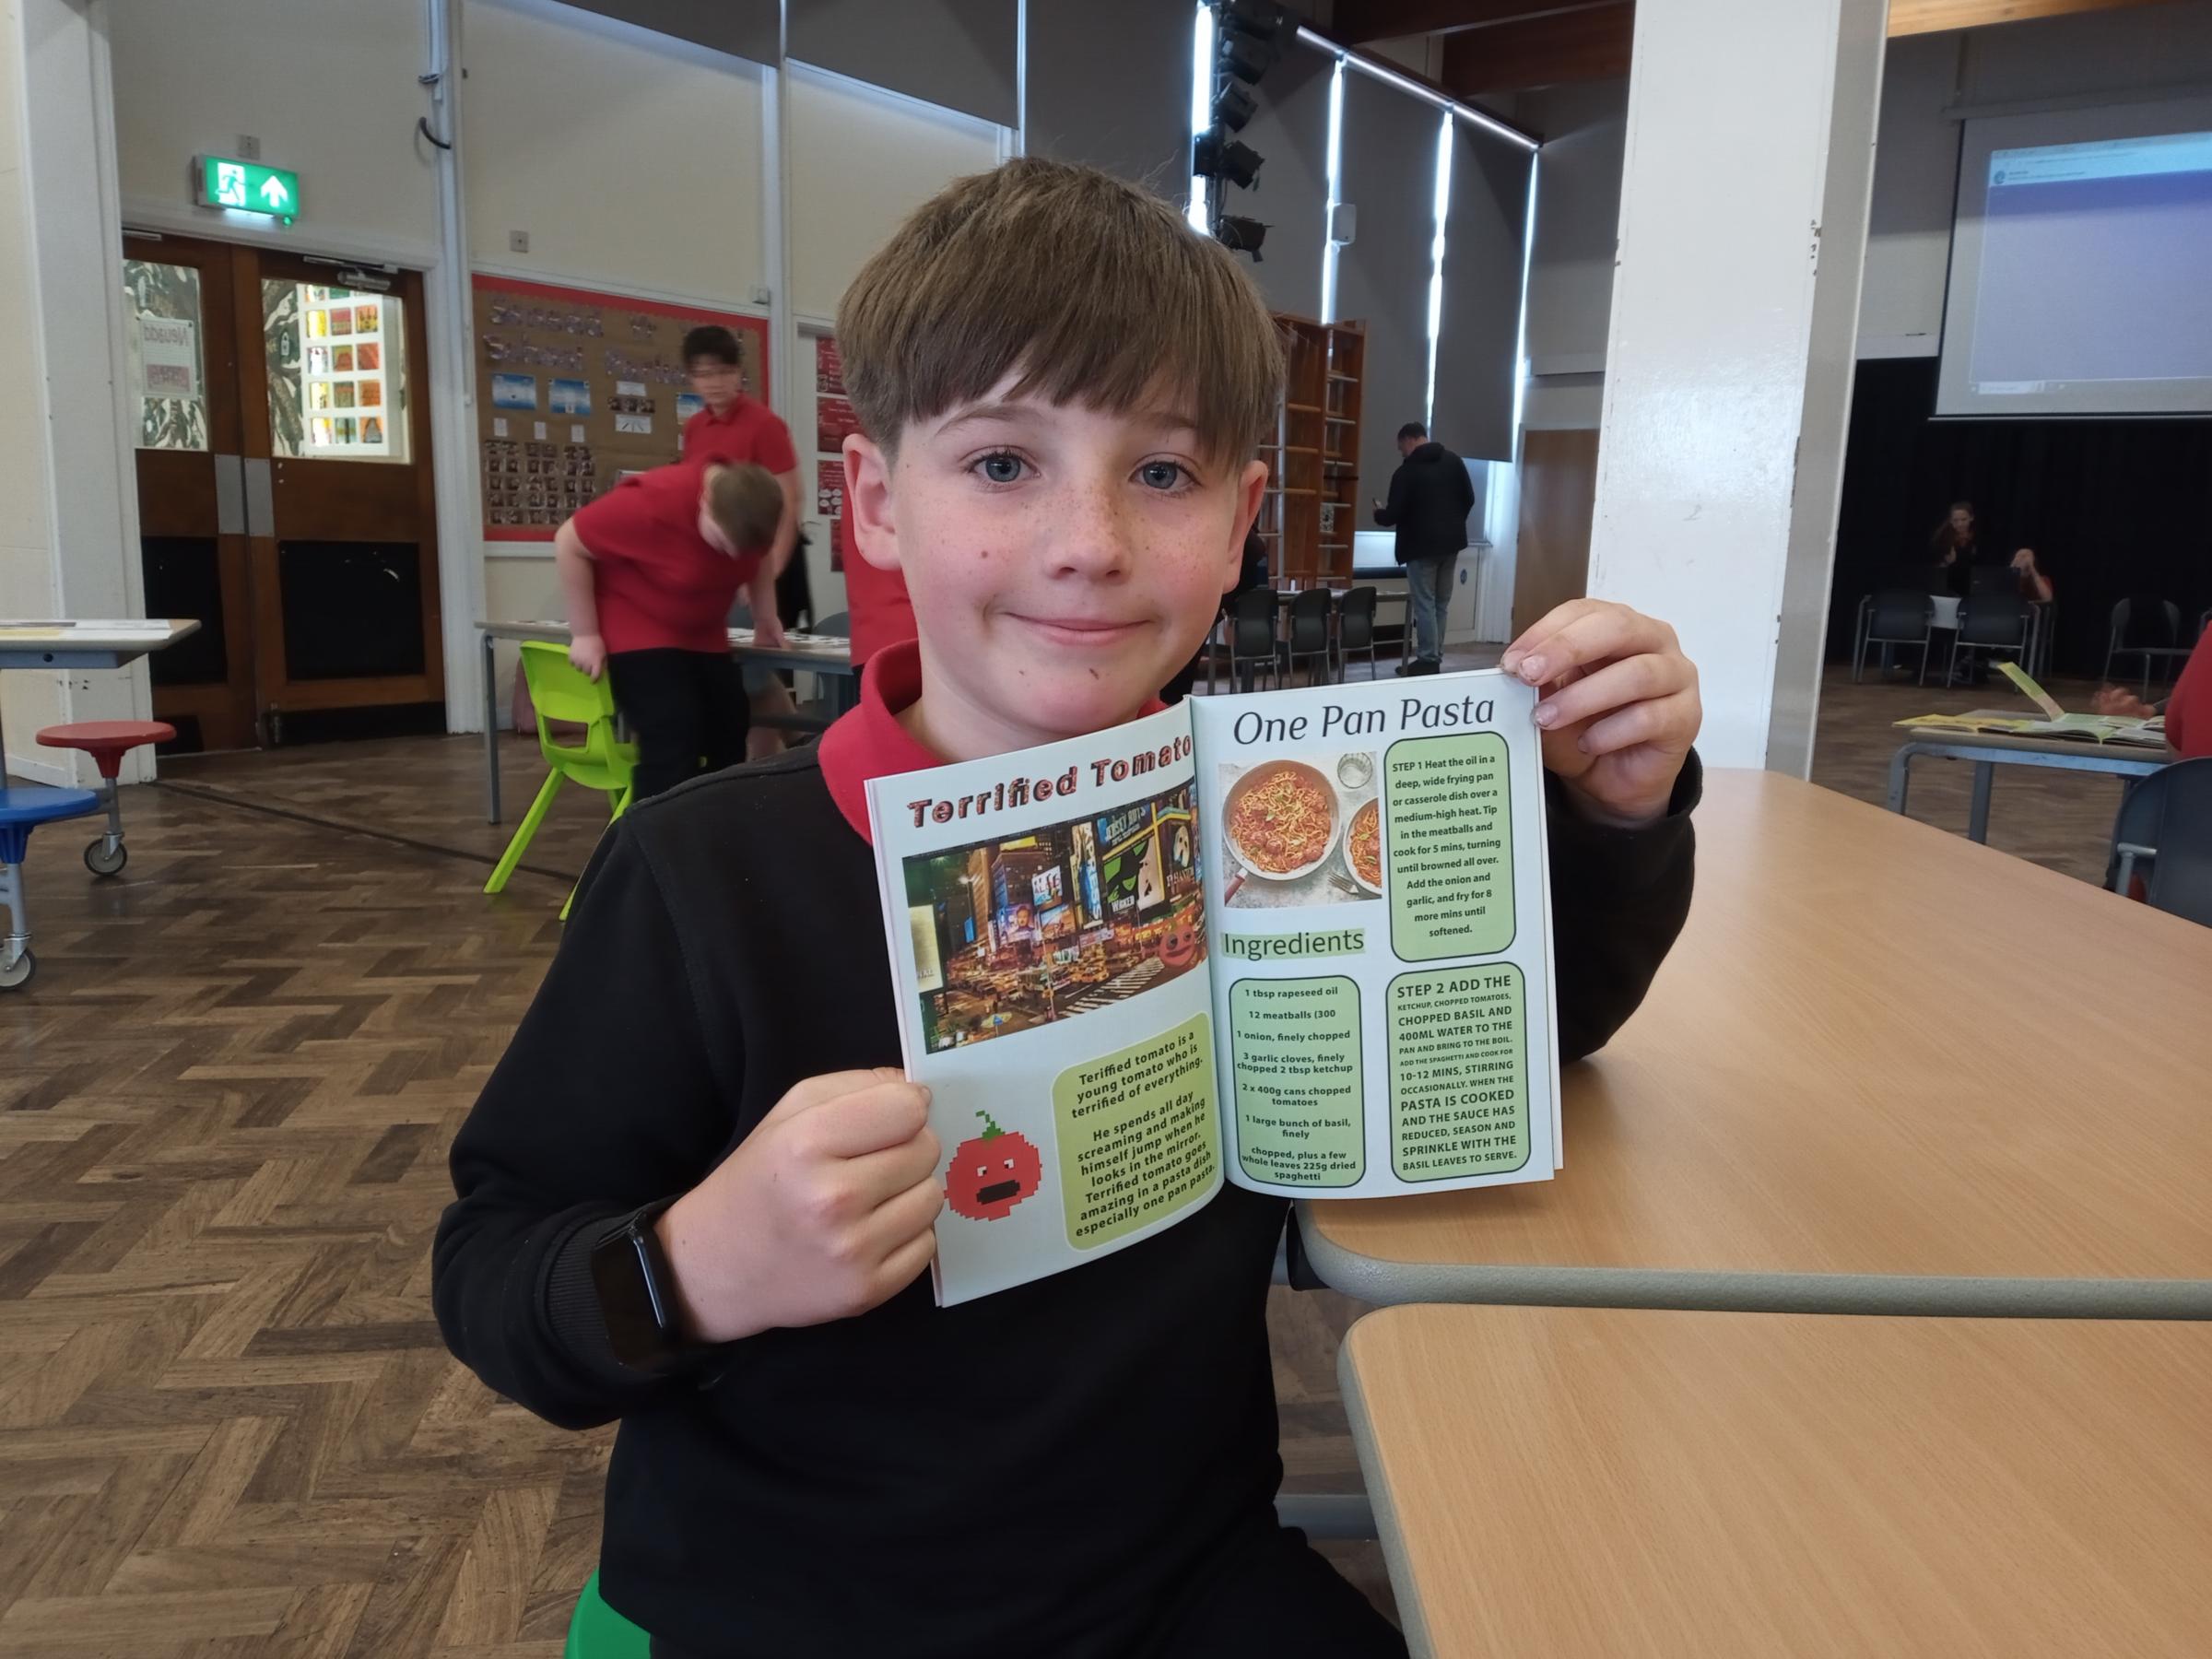 Archie Pitson, with his recipe featured in the schools book.